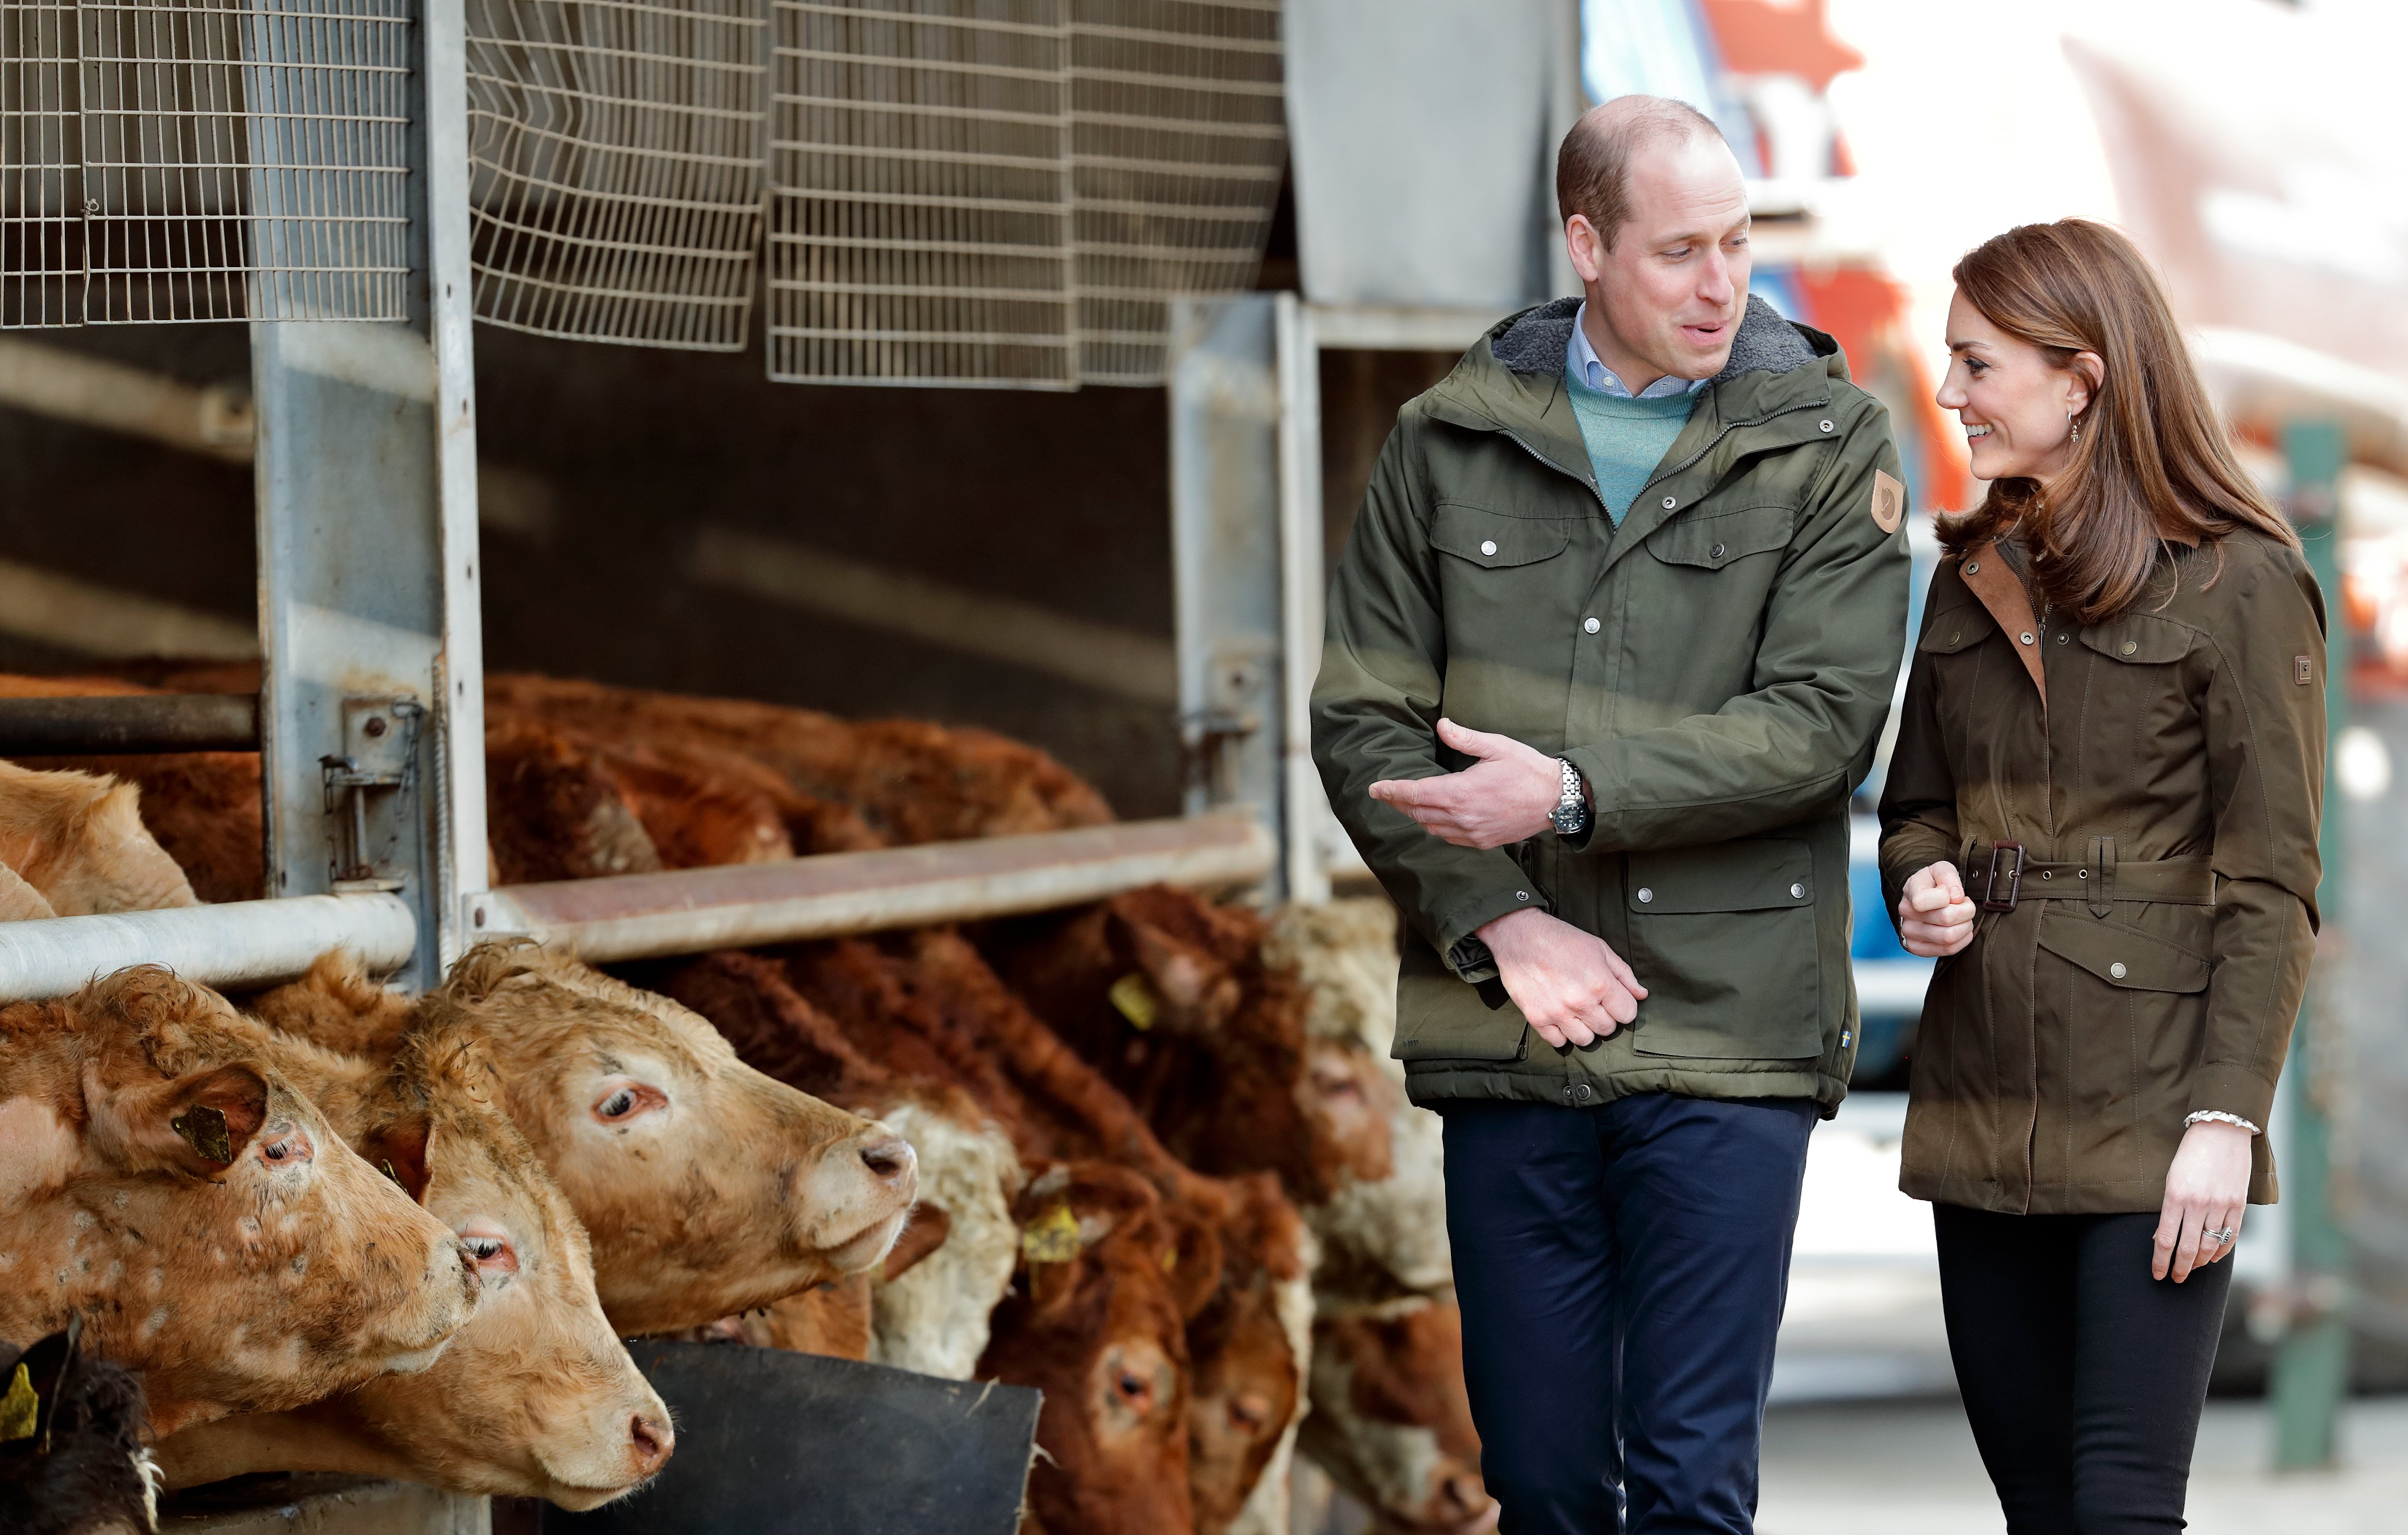 Prince William, Duke of Cambridge and Kate Middleton, Duchess of Cambridge visiting the Teagasc Animal & Grassland Research Centre in Grange, County Meath on March 4, 2020 in Dublin, Ireland. / Source: Getty Images